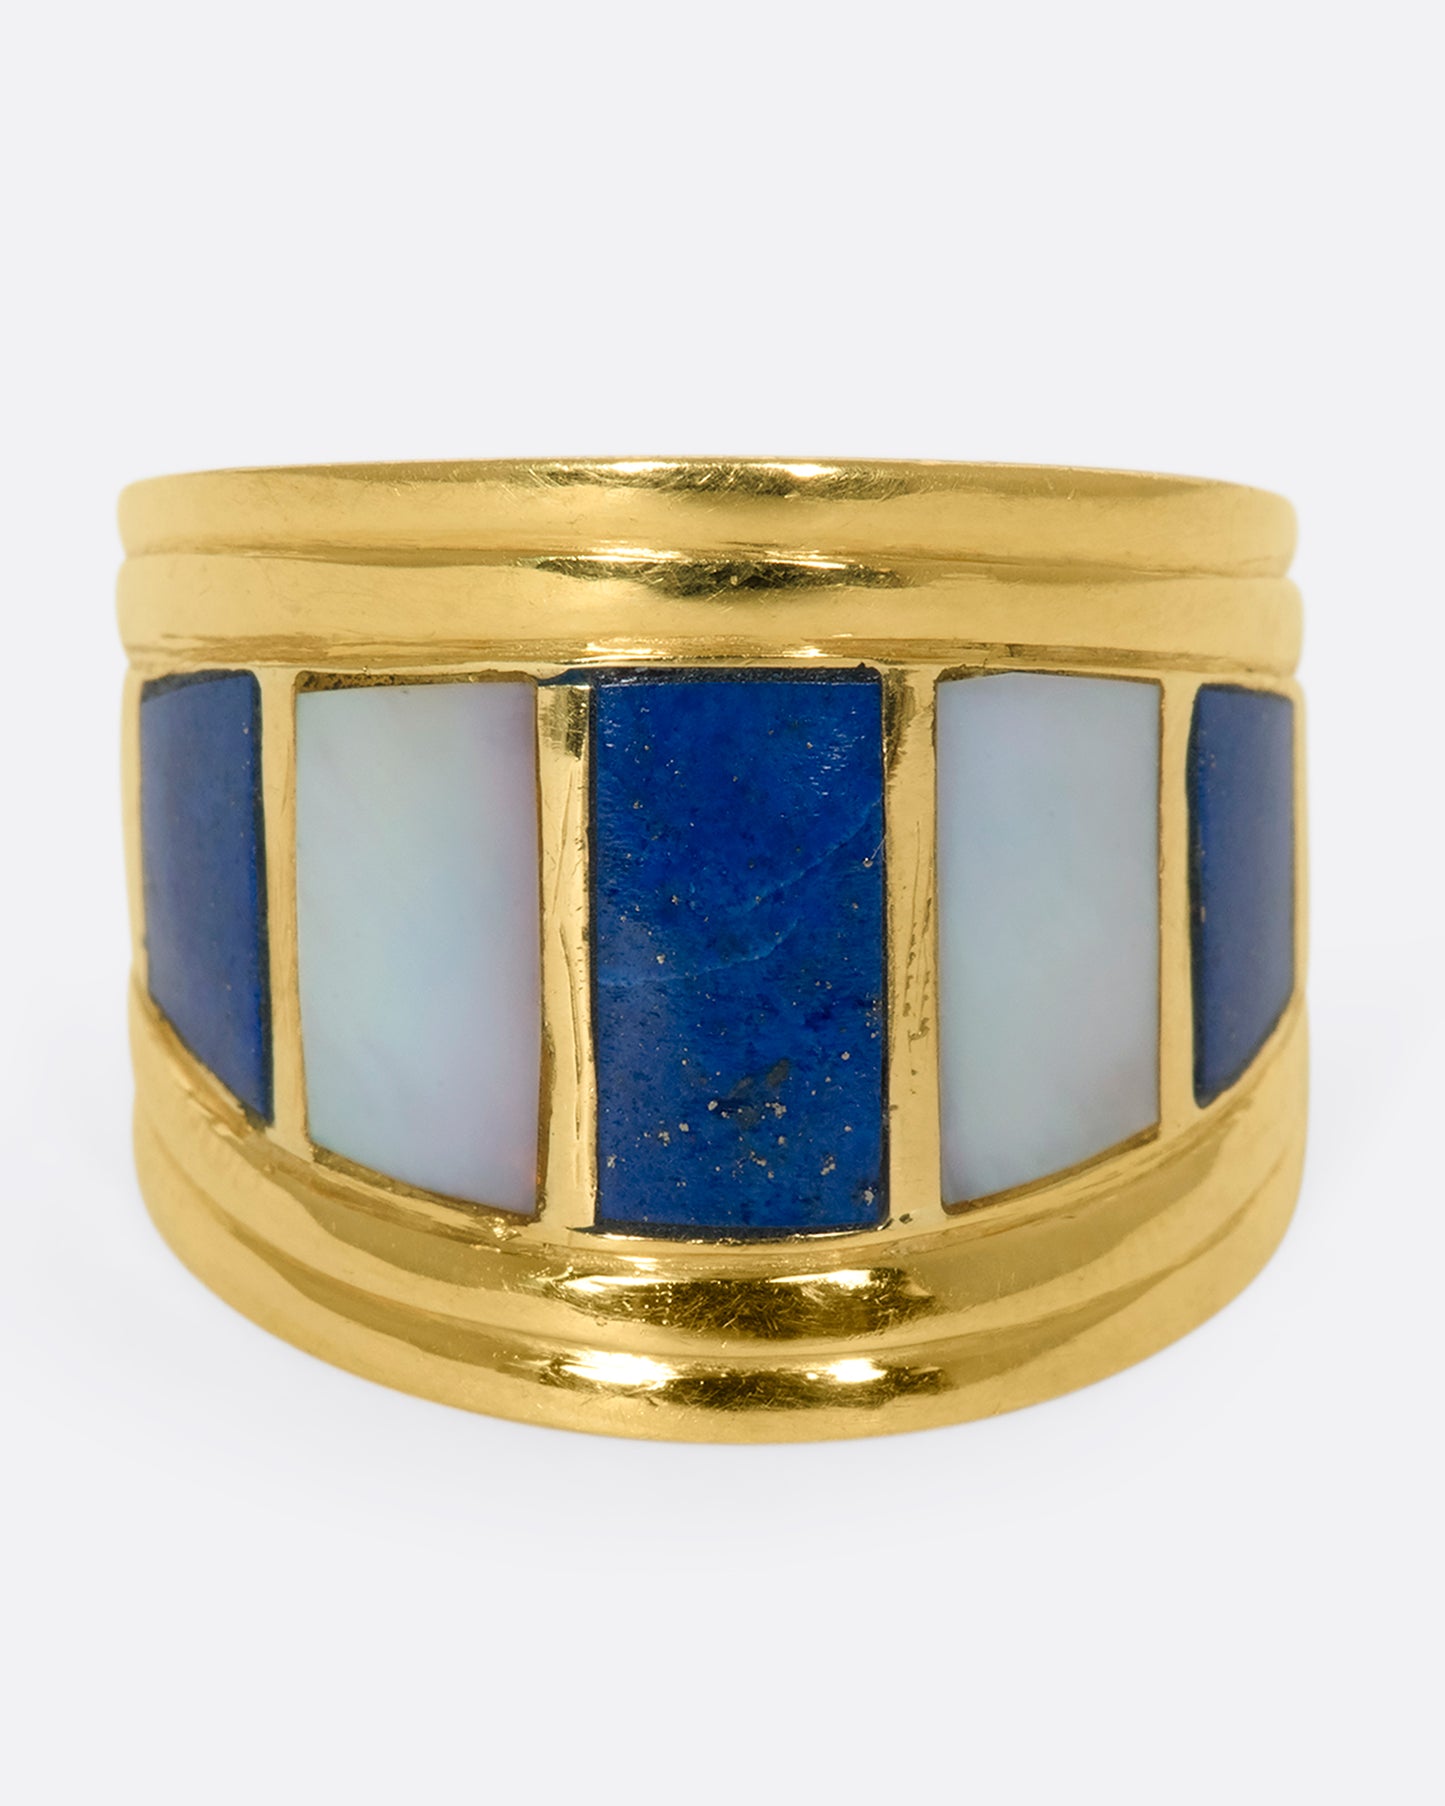 A forward view of a wide, tapered yellow gold ring with mother of pearl and lapis inlaid stripes.